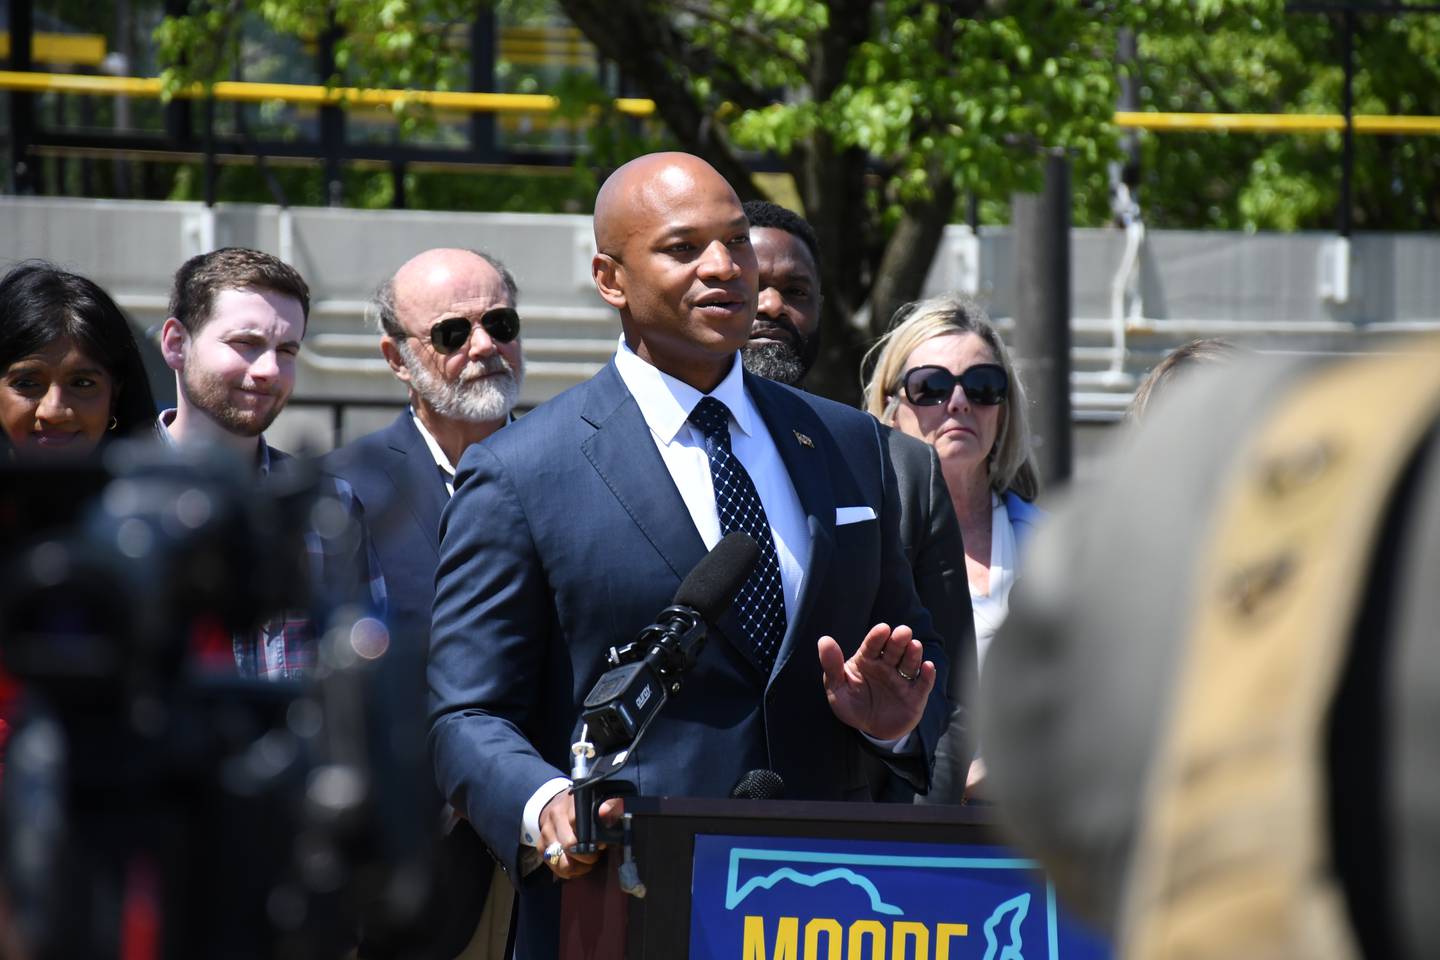 Photo by Pamela Wood/The Baltimore Banner -- Maryland candidate for governor Wes Moore speaks at a campaign event in Bowie on April 29, 2022.